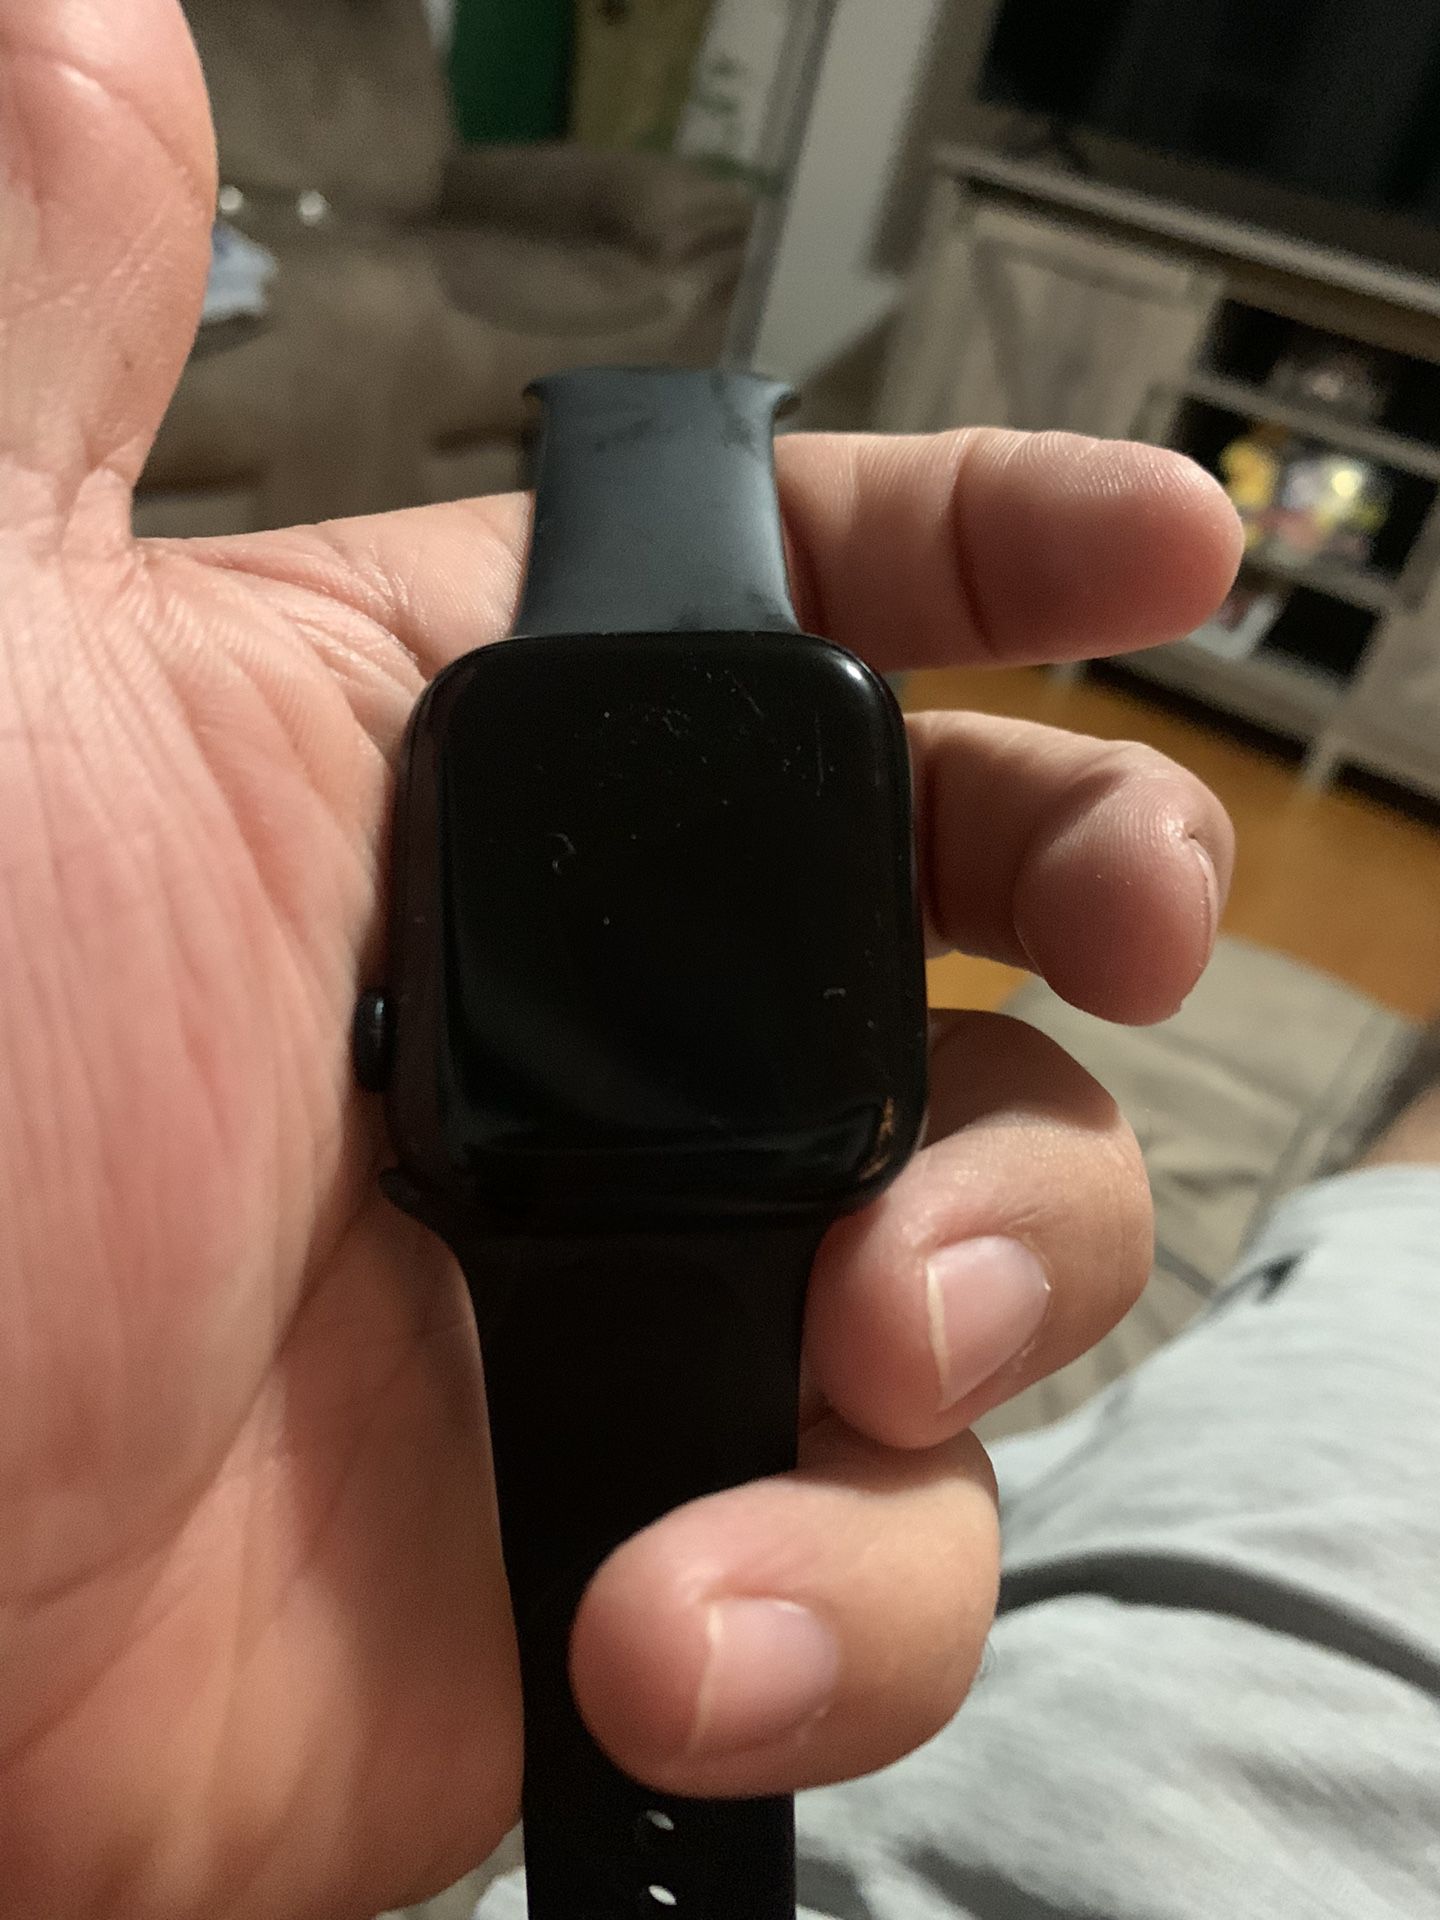 Apple Watch Series 7 Cellular And GPS iCloud Locked 